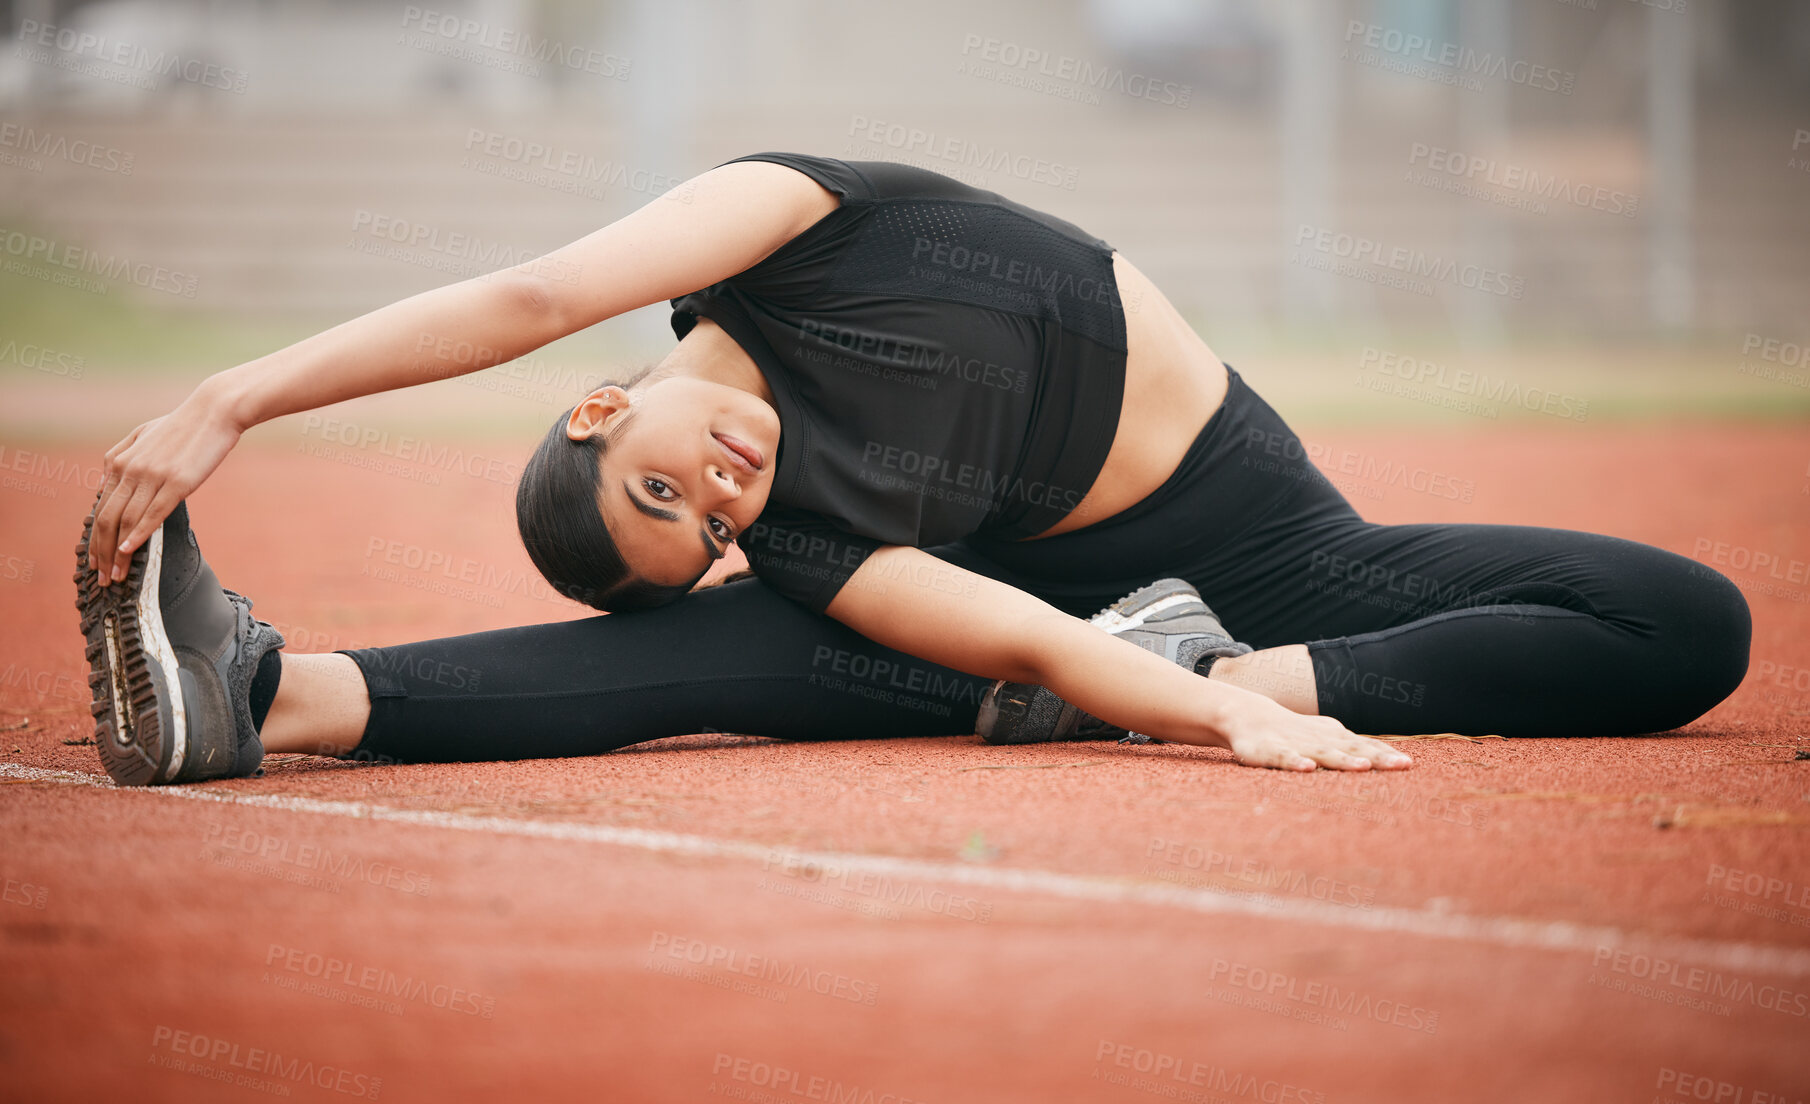 Buy stock photo Shot of an athletic young woman stretching while out on the track